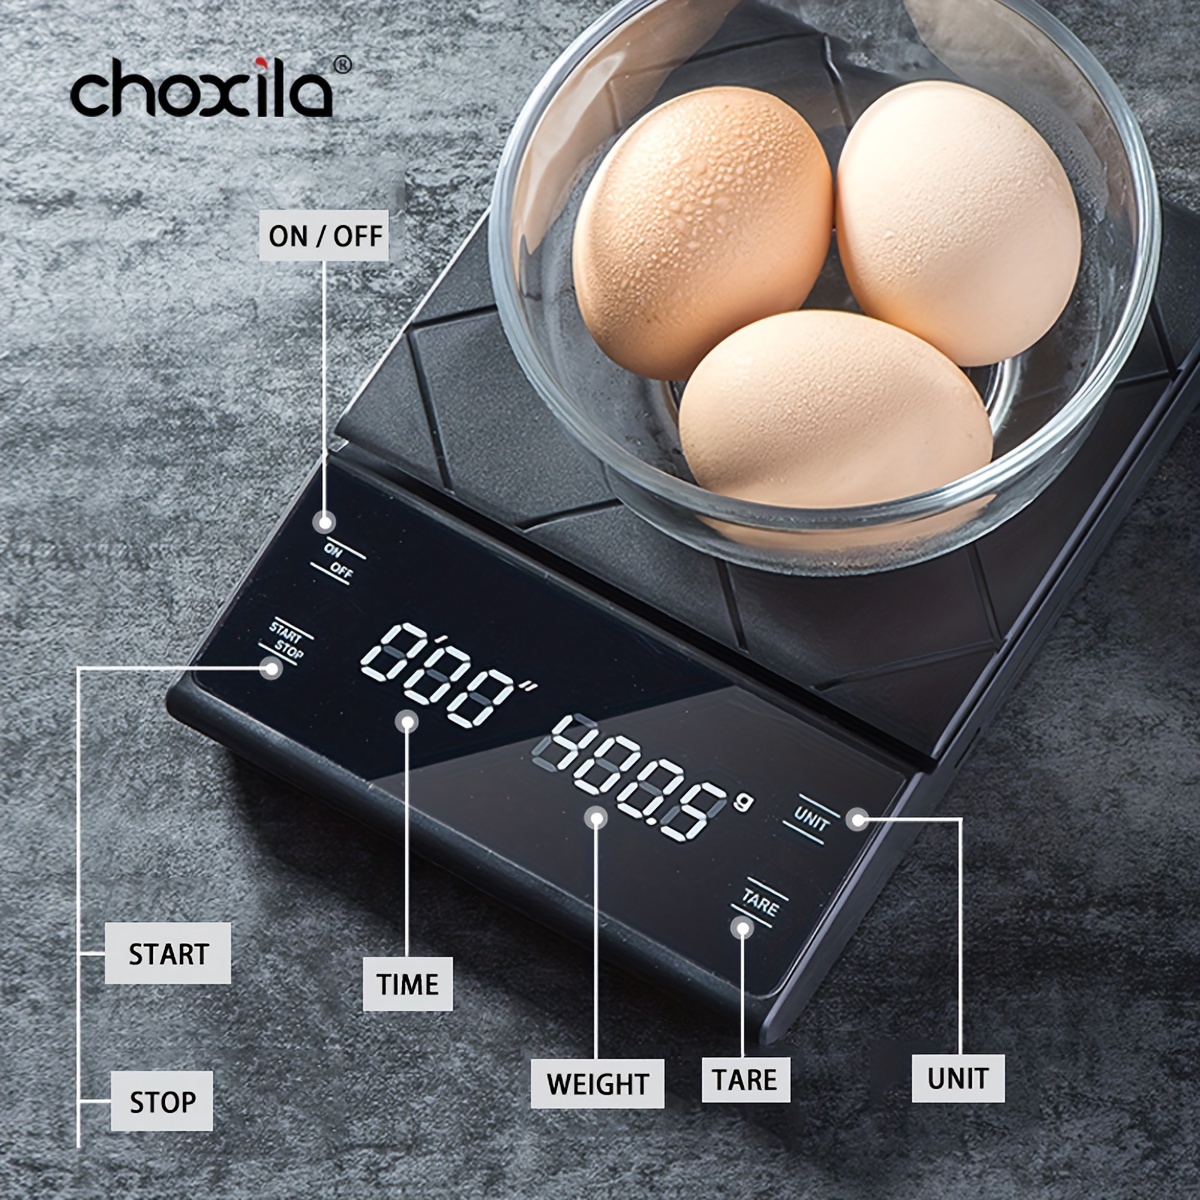 1pc Black Multifunctional Coffee Scale High Precision Kitchen